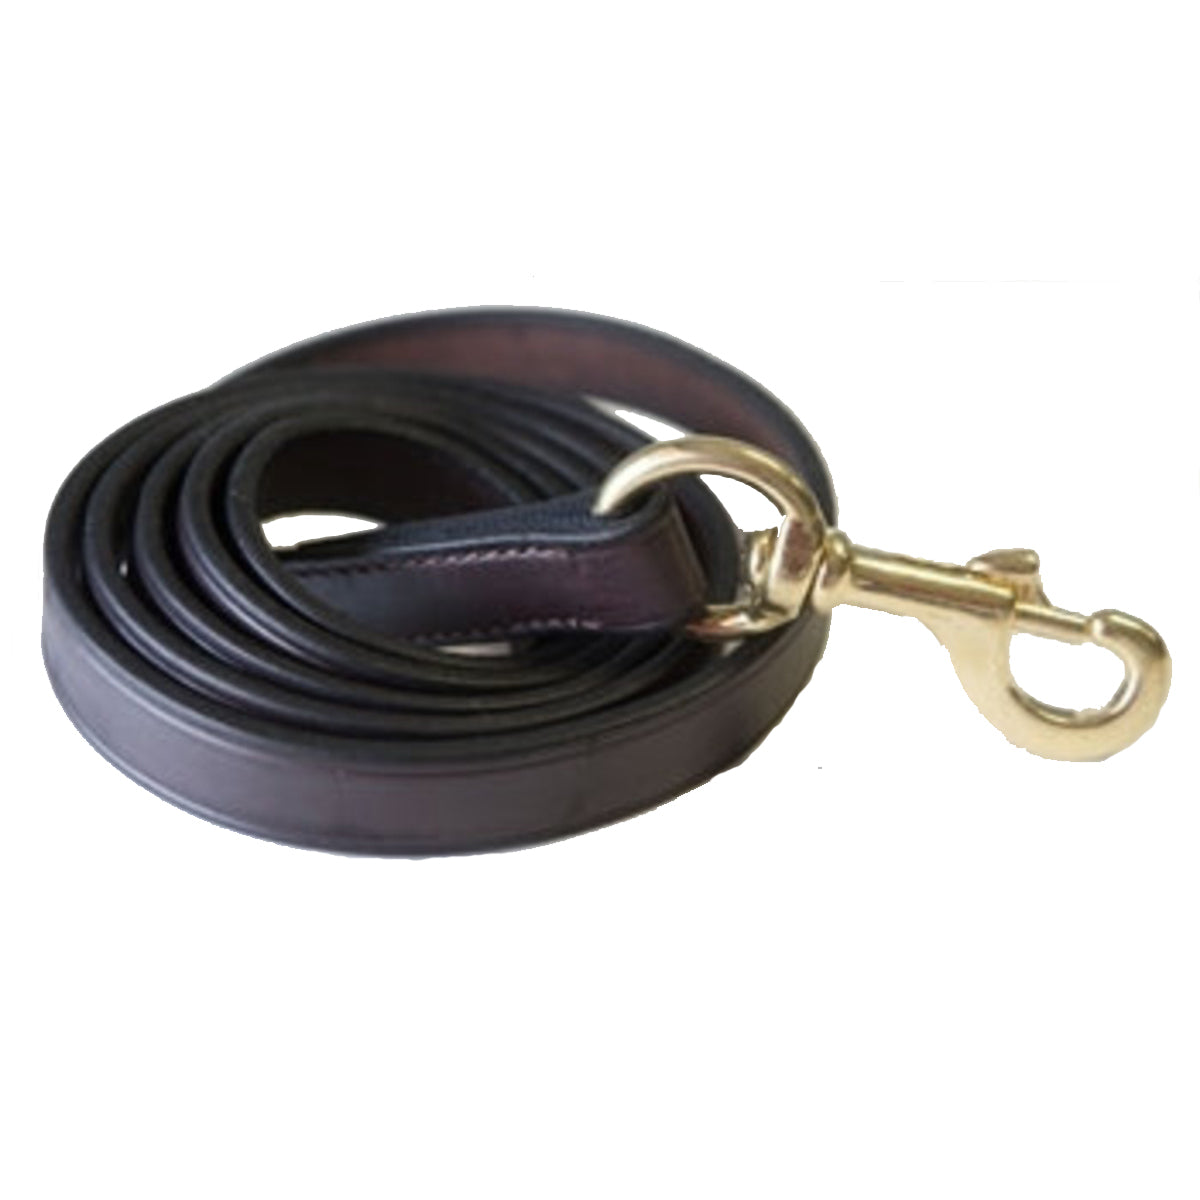 Nunn Finer Leather Lead With Snap End